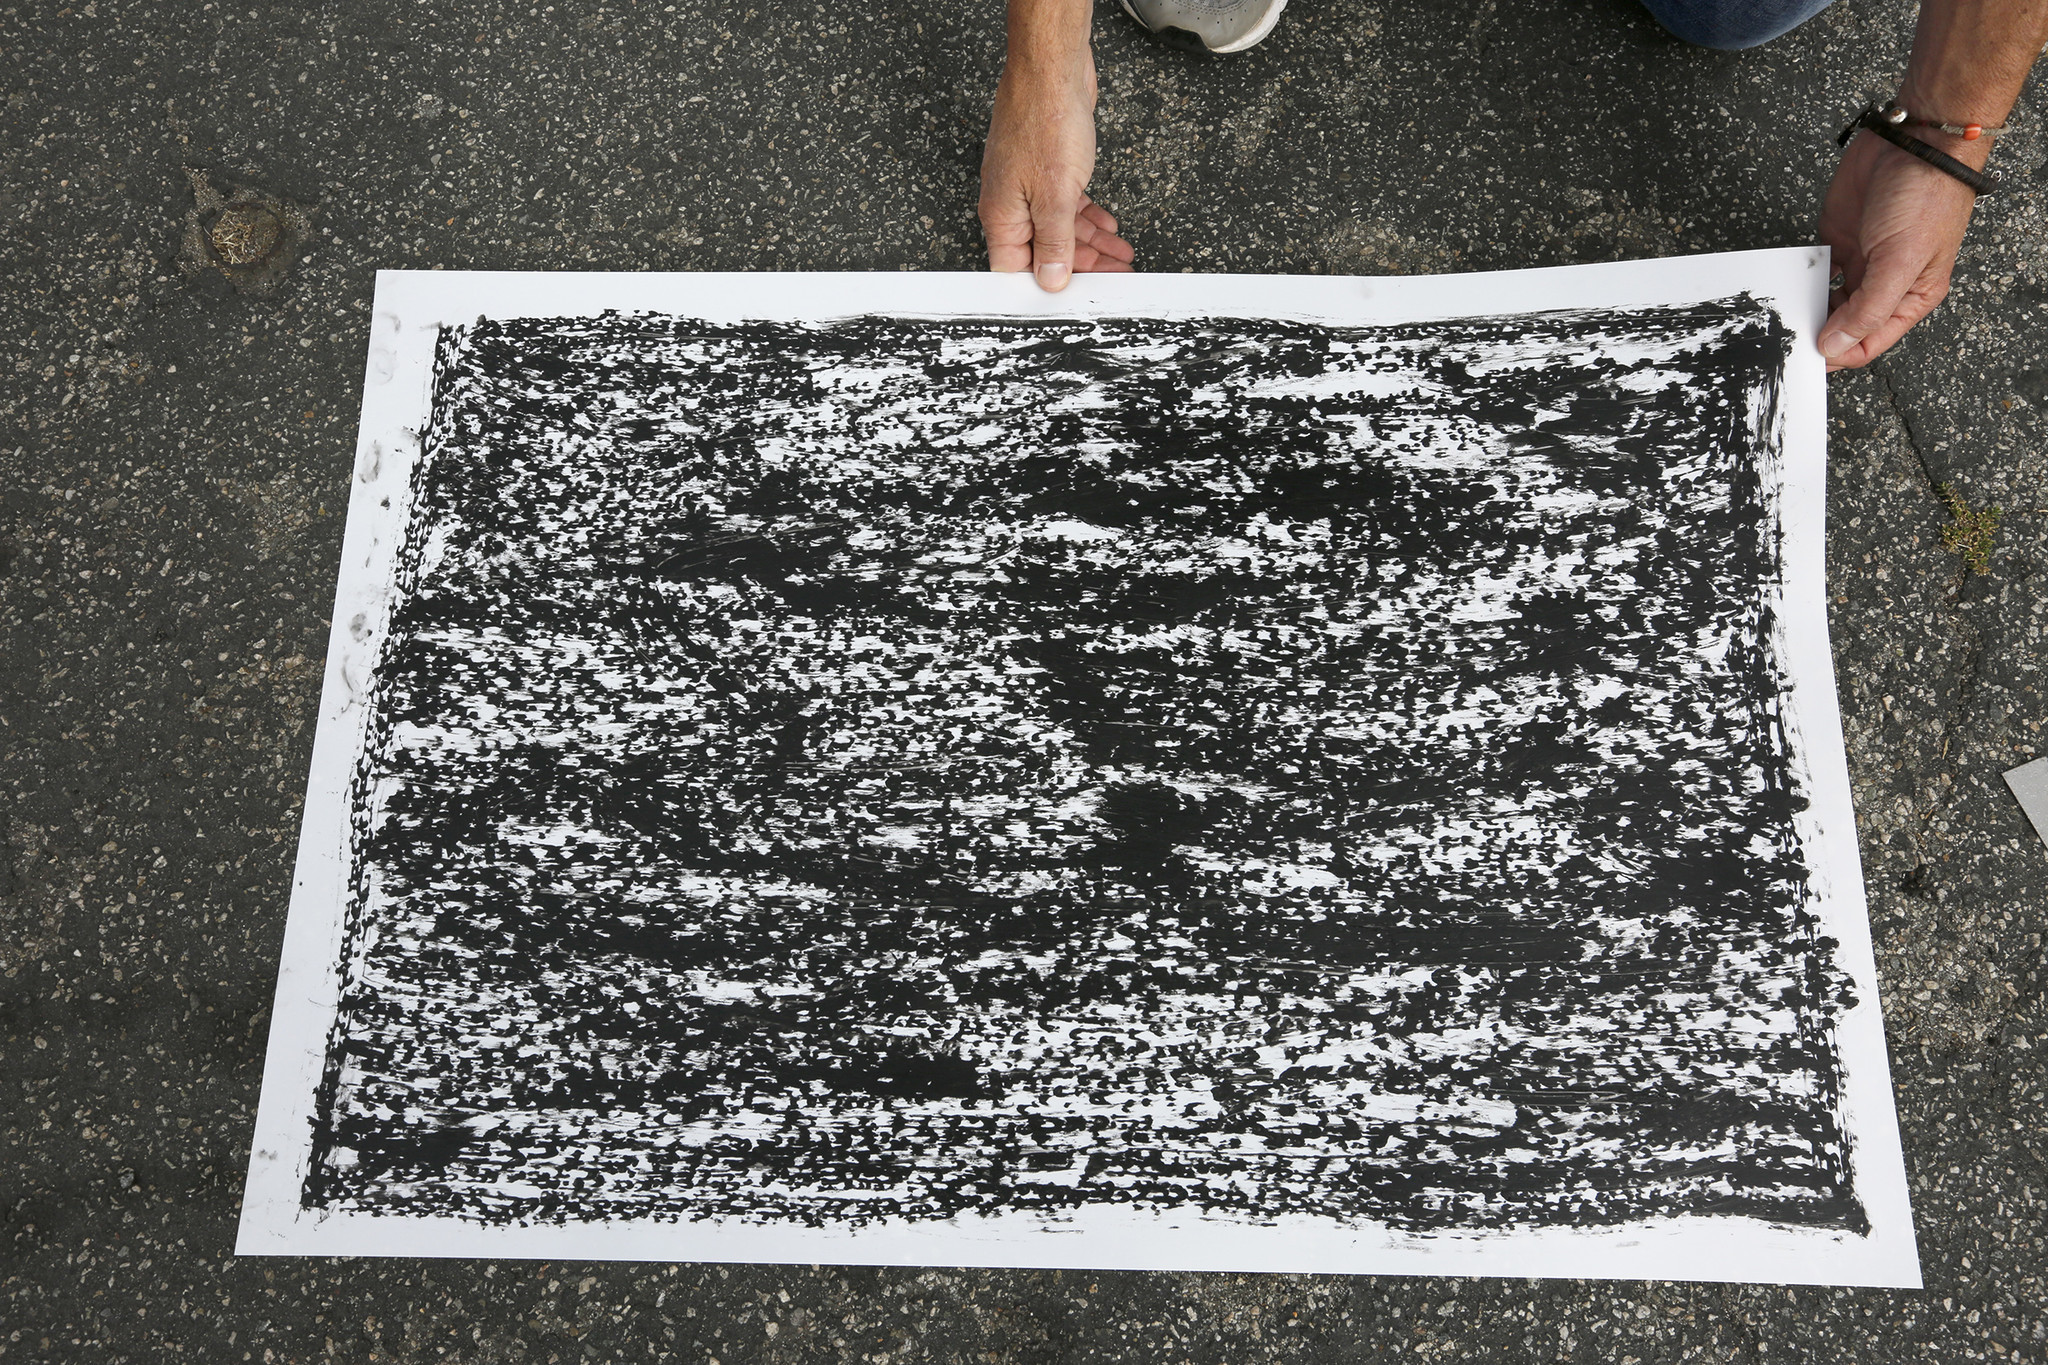 Artist Jeff Beall displays one of the rubbings taken at the site of an unsolved death related to the 1992 L.A. riots — in this case that of a 23-year-old Latino man named Arturo C. Miranda.